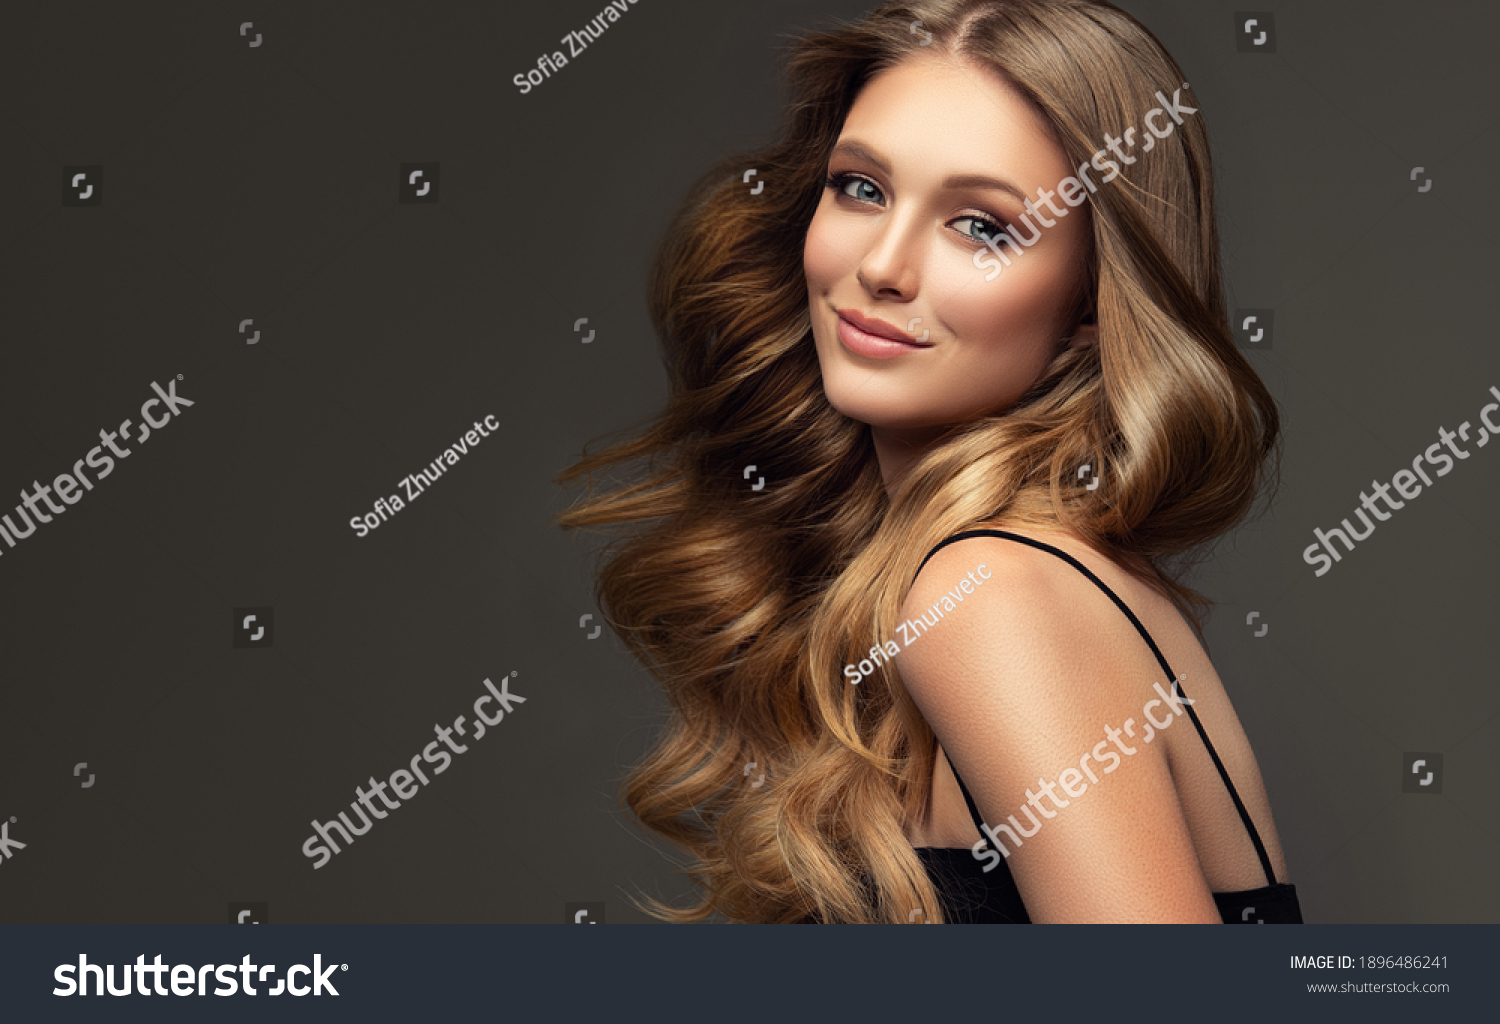 Beauty blonde girl with long  and   shiny wavy  hair .  Beautiful   woman model with curly hairstyle . Fashion, cosmetics and makeup #1896486241